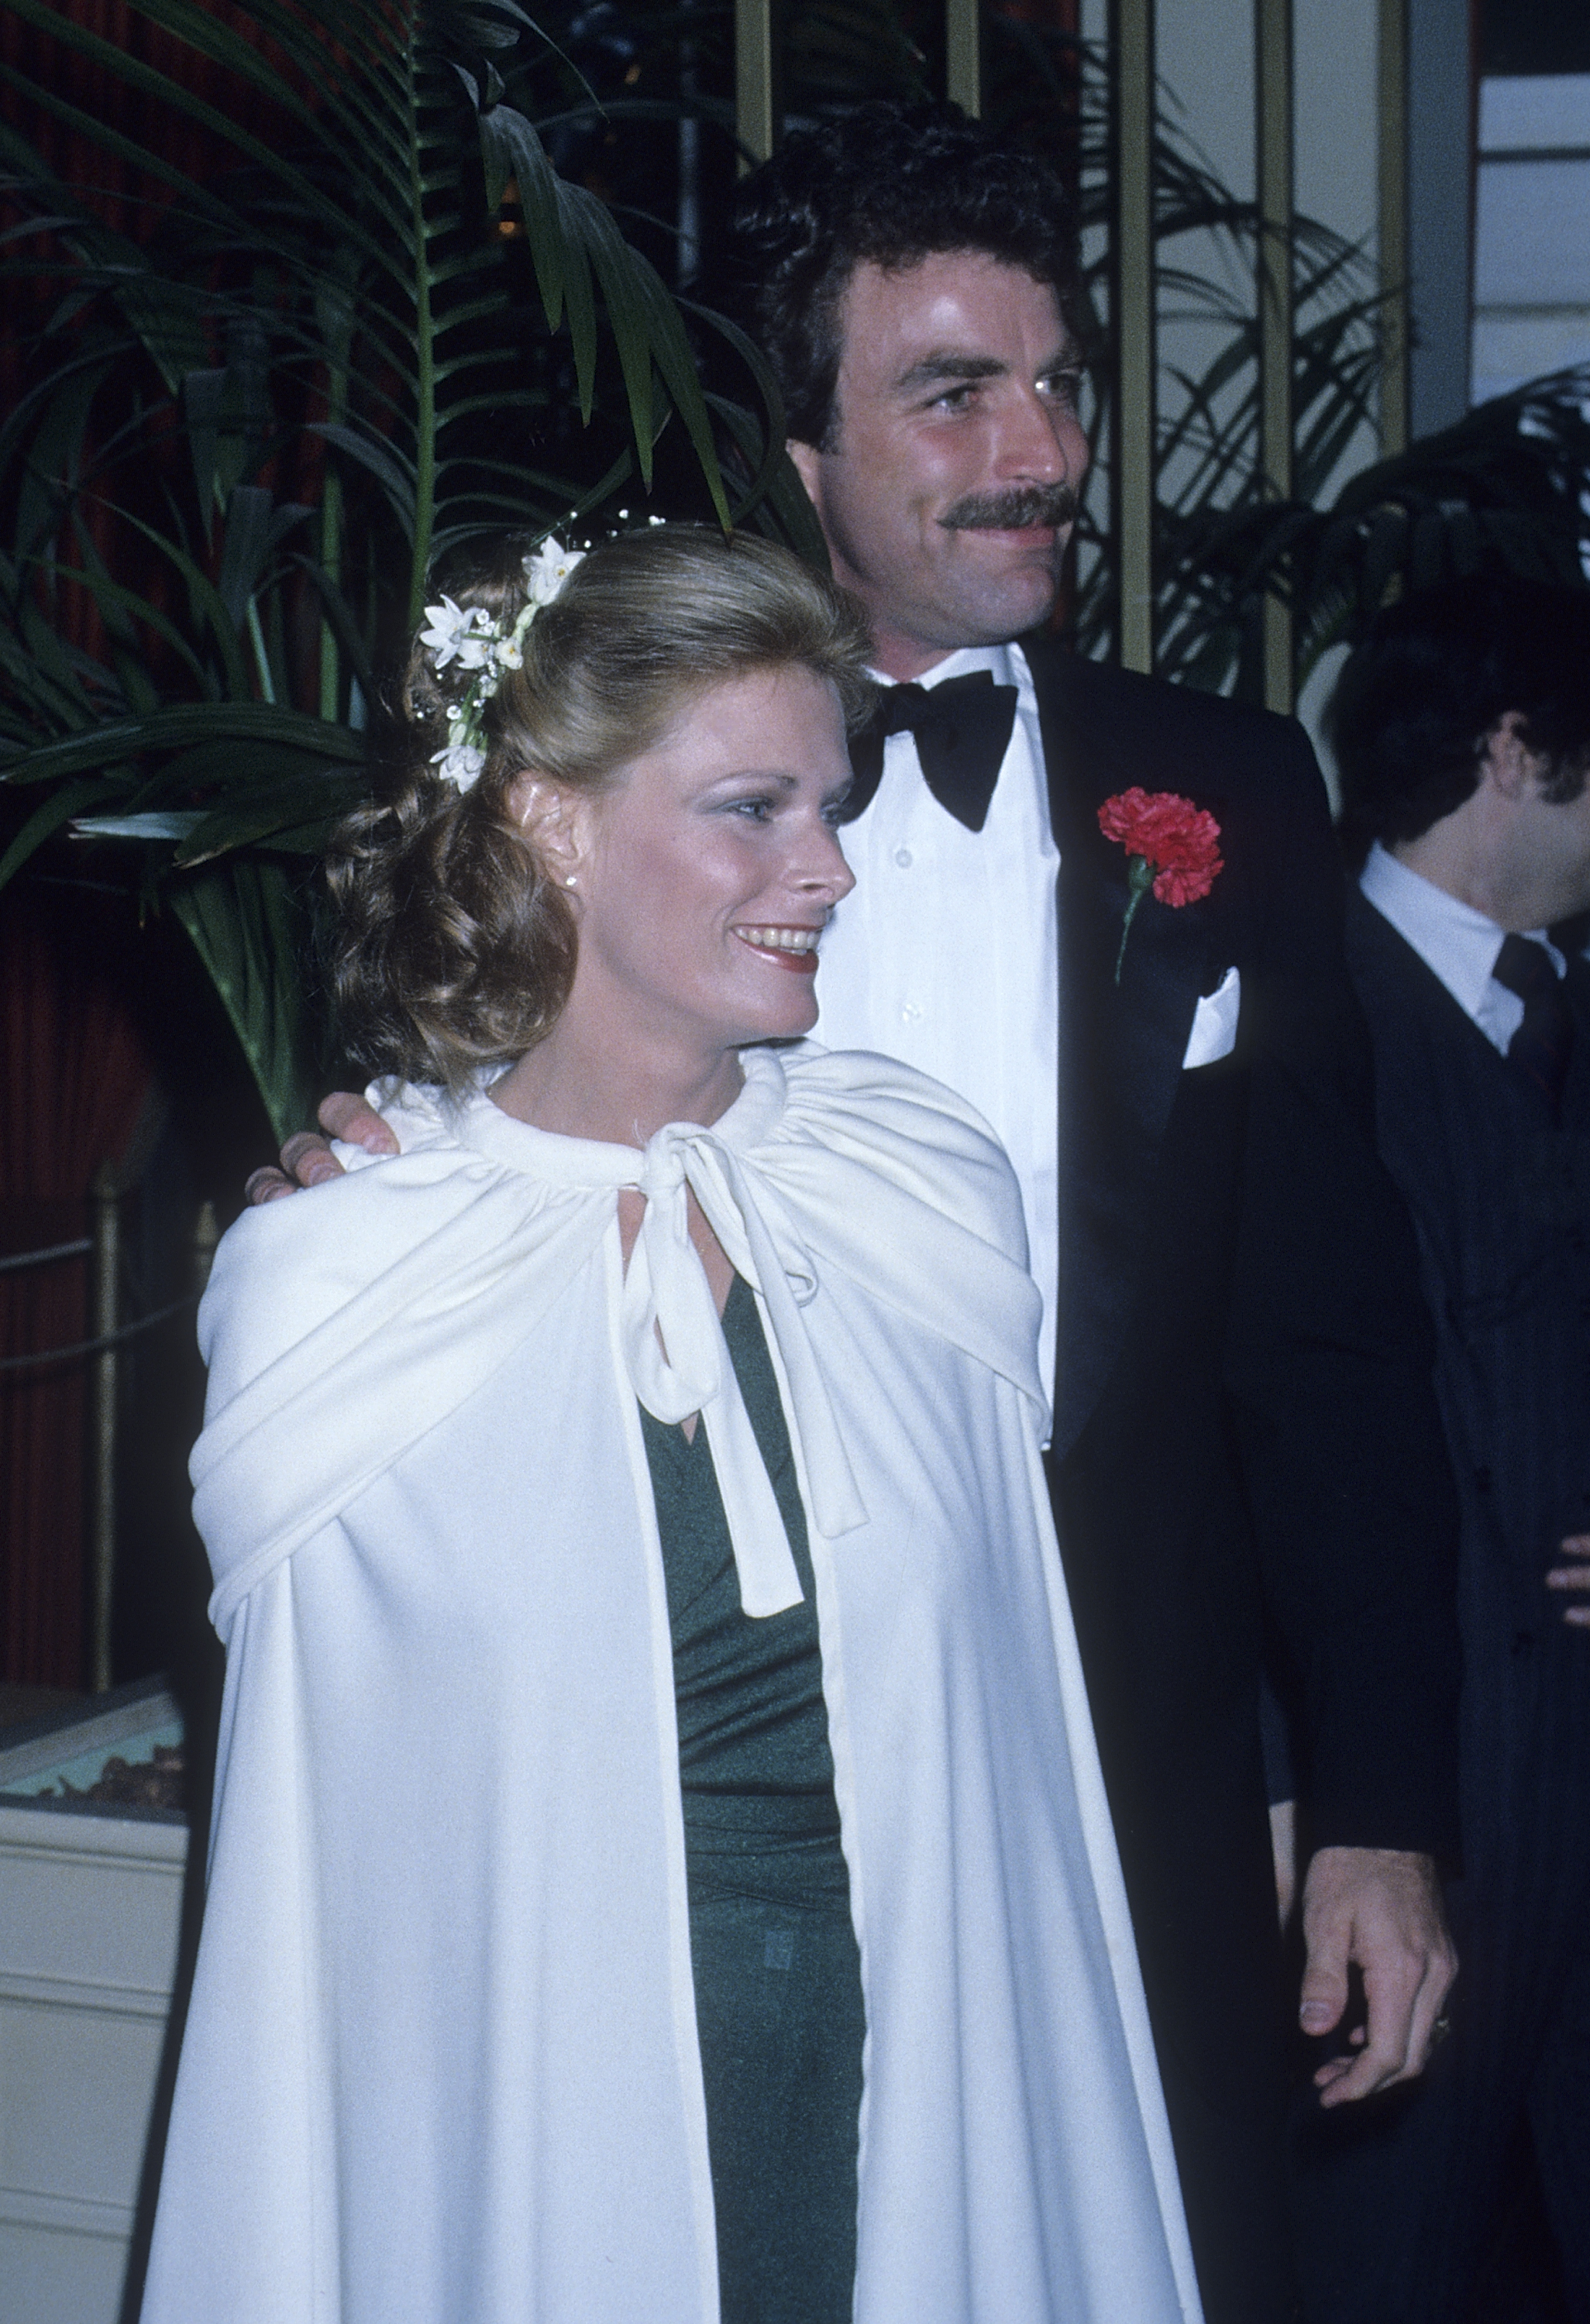 Tom Selleck and Jacqueline Ray attend the 35th Annual Golden Globe Awards in Beverly Hills, California on January 28, 1978. | Source: Getty Images